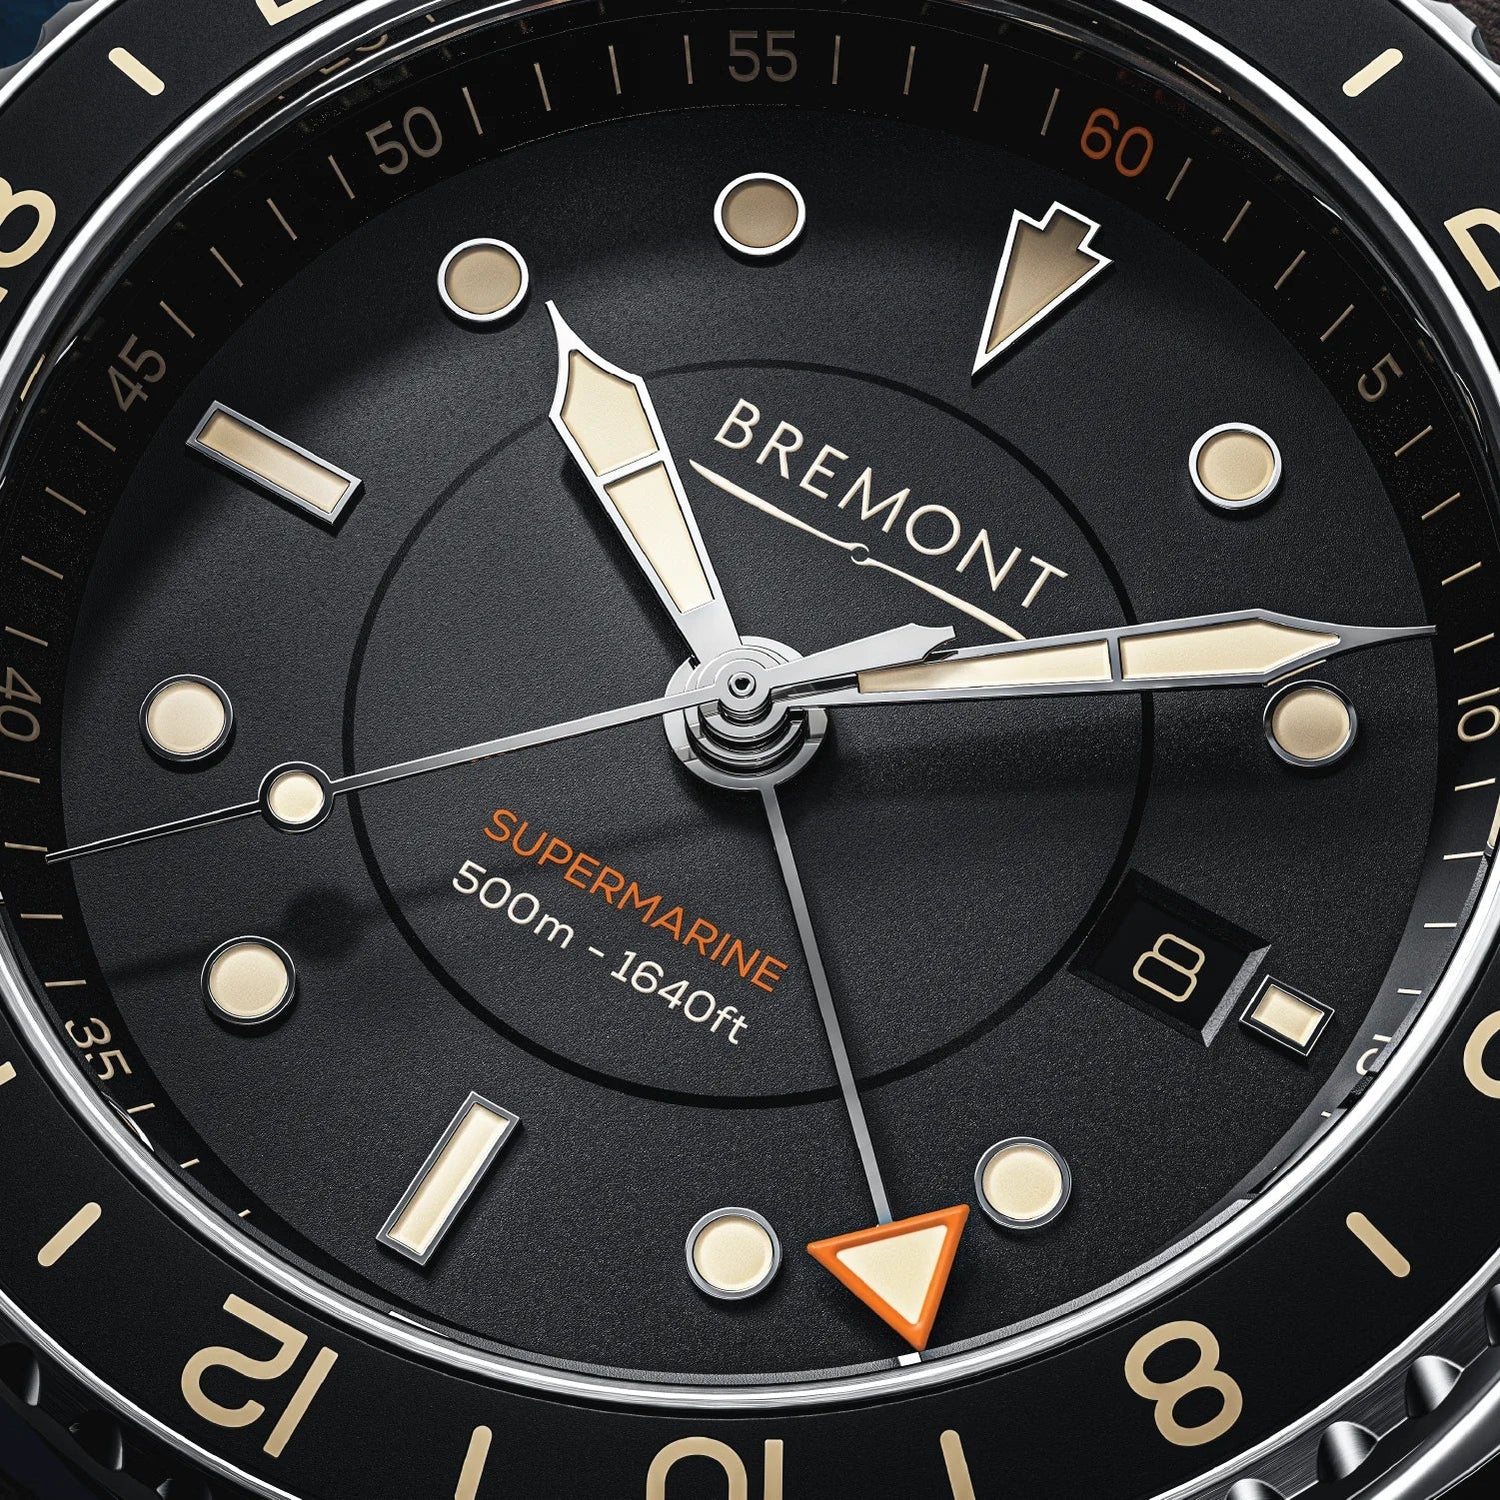 Bremont Watch Company Watches | Mens | Supermarine S502 [Leather]